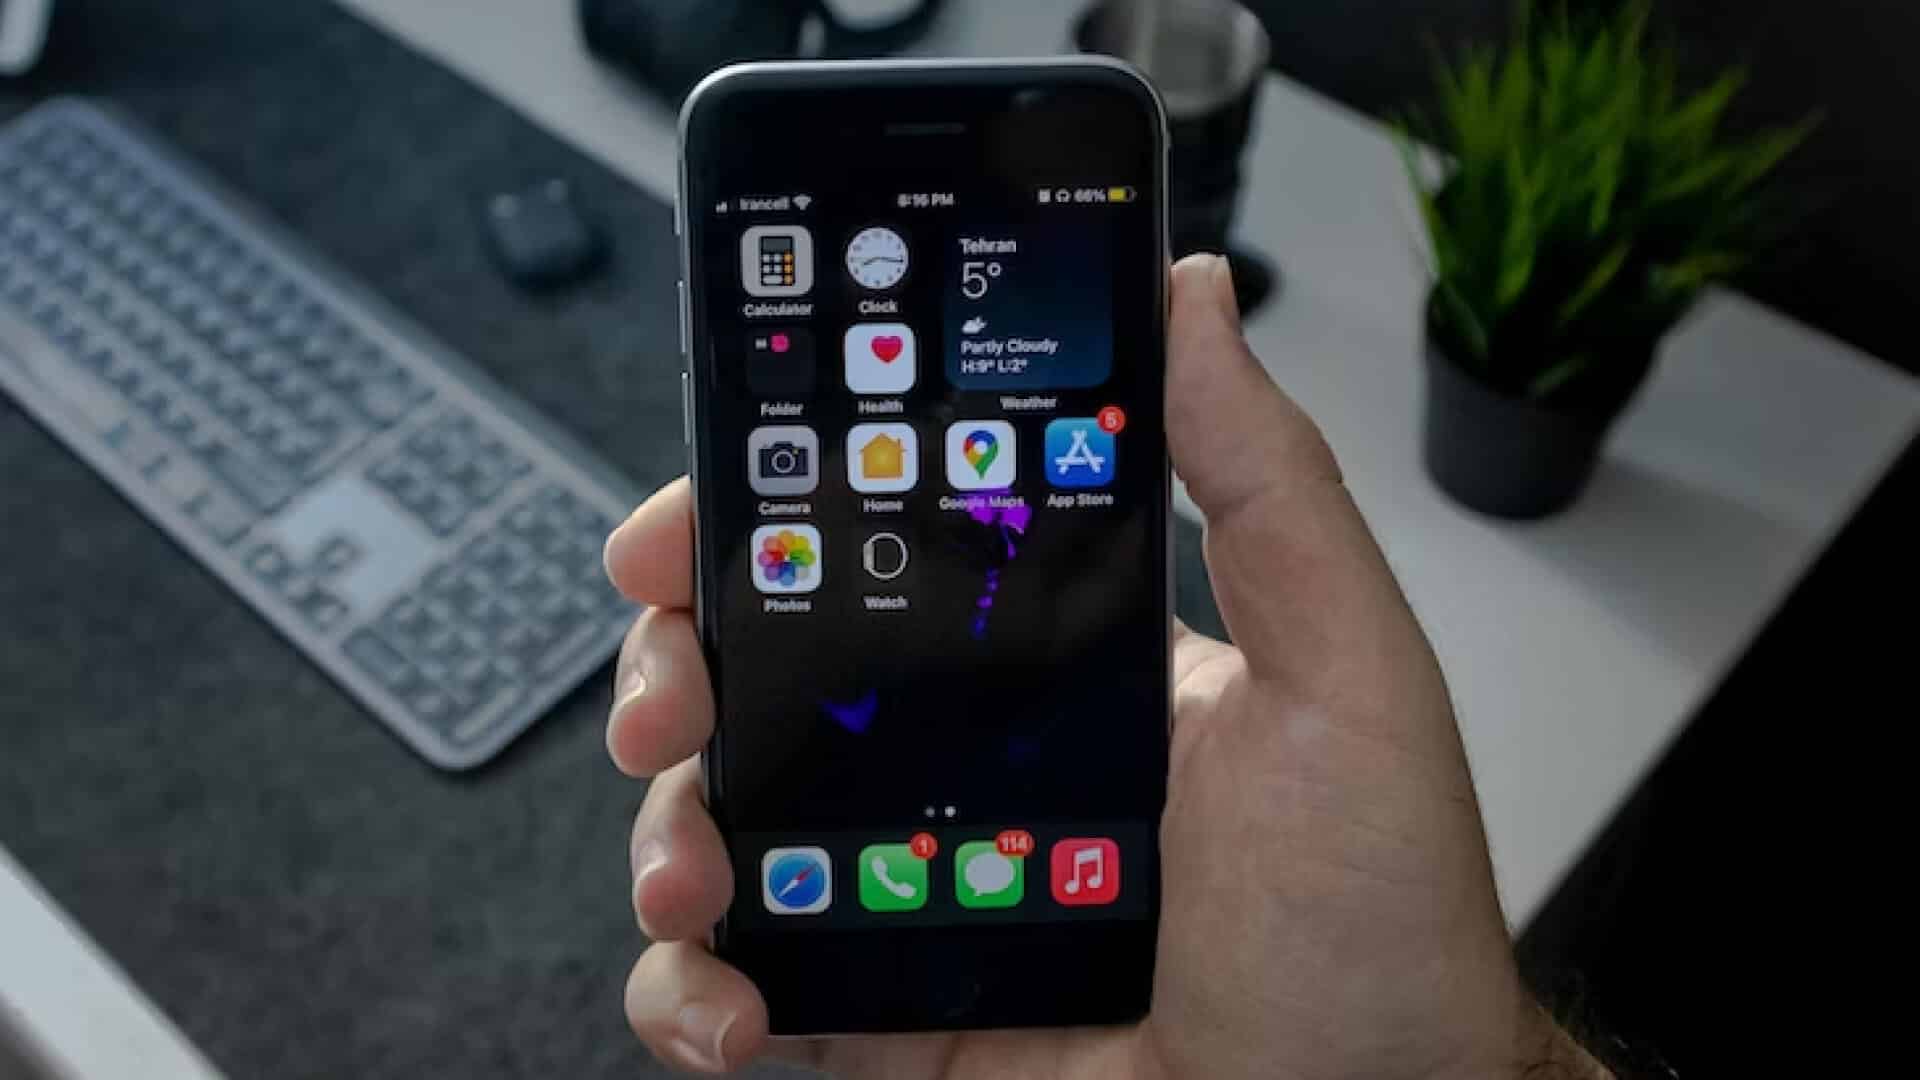 How to stop iPhone side button from hanging up calls